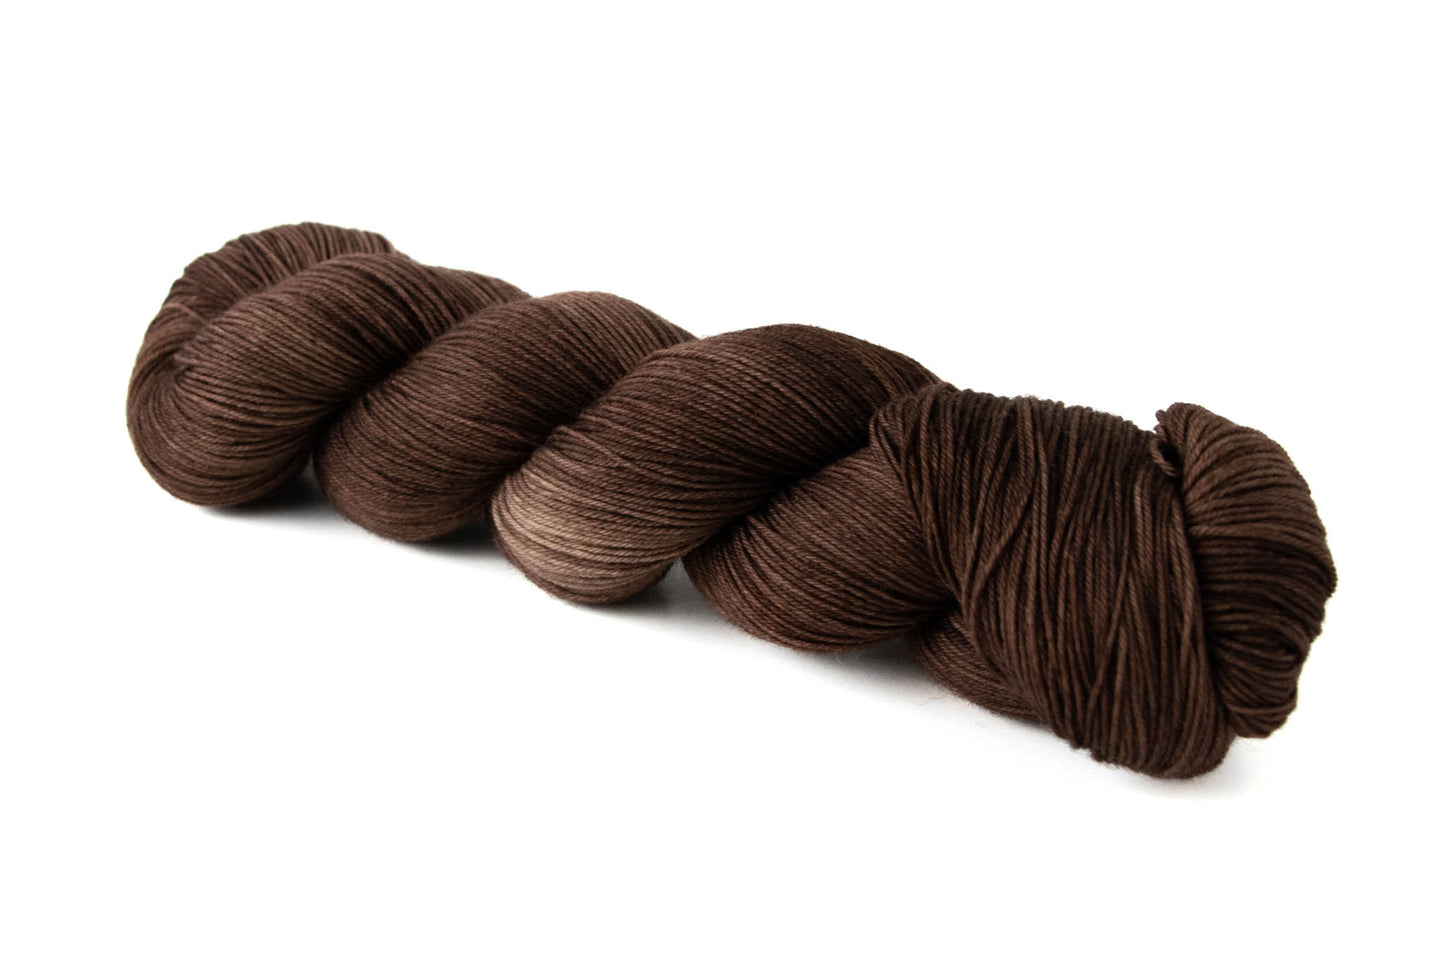 A skein of tonal chocolate brown hand-dyed wool yarn.